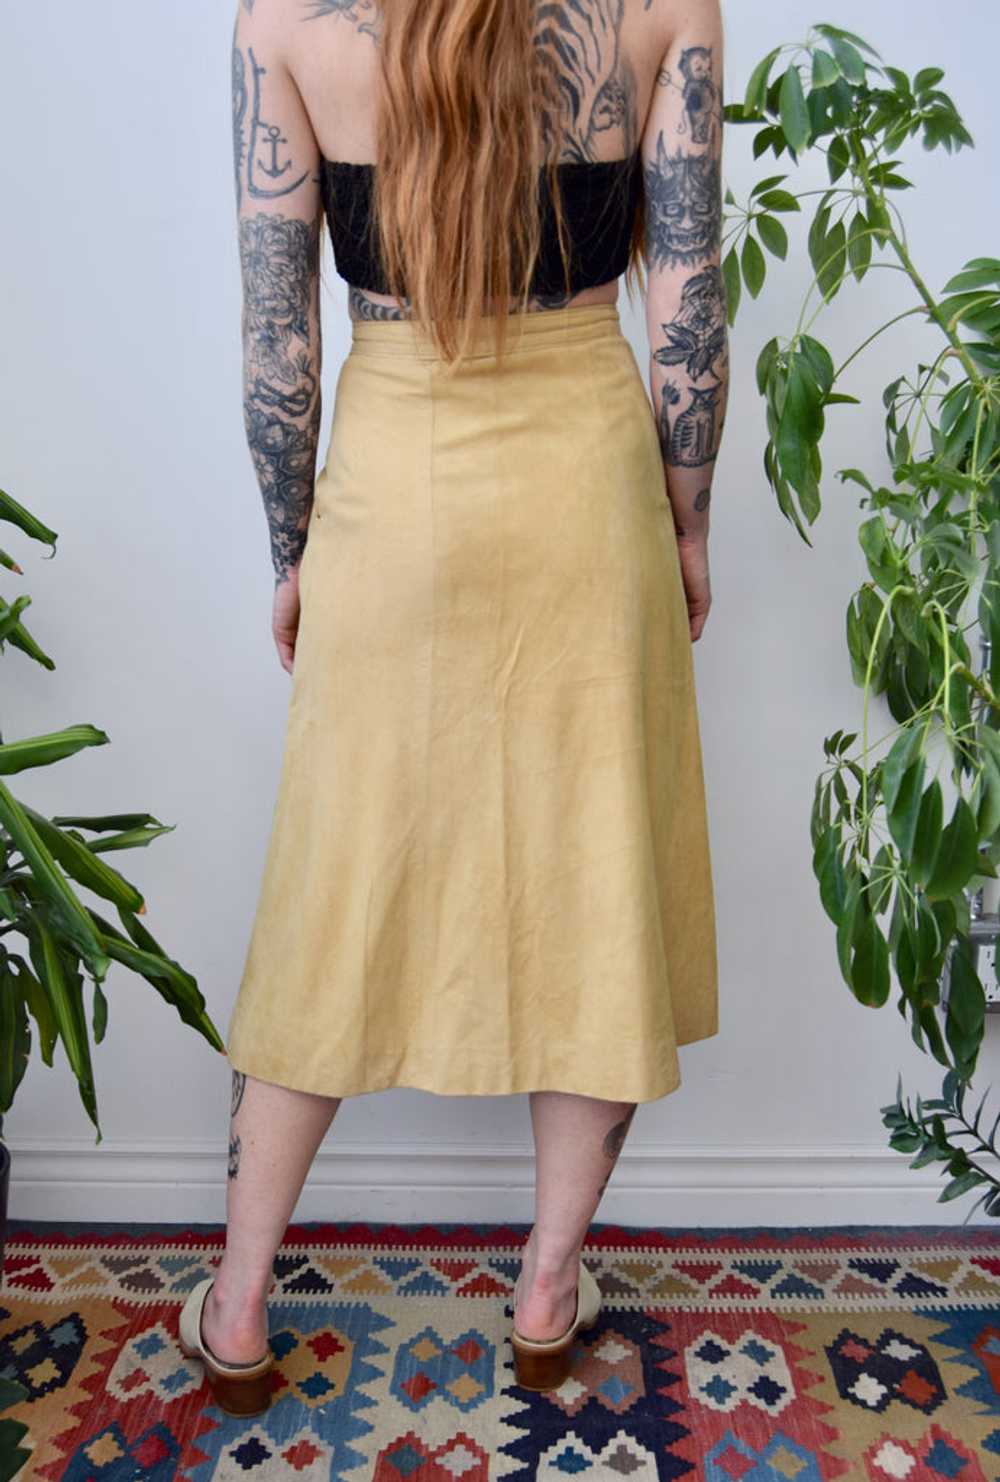 Tawny Suede 70s Skirt - image 2